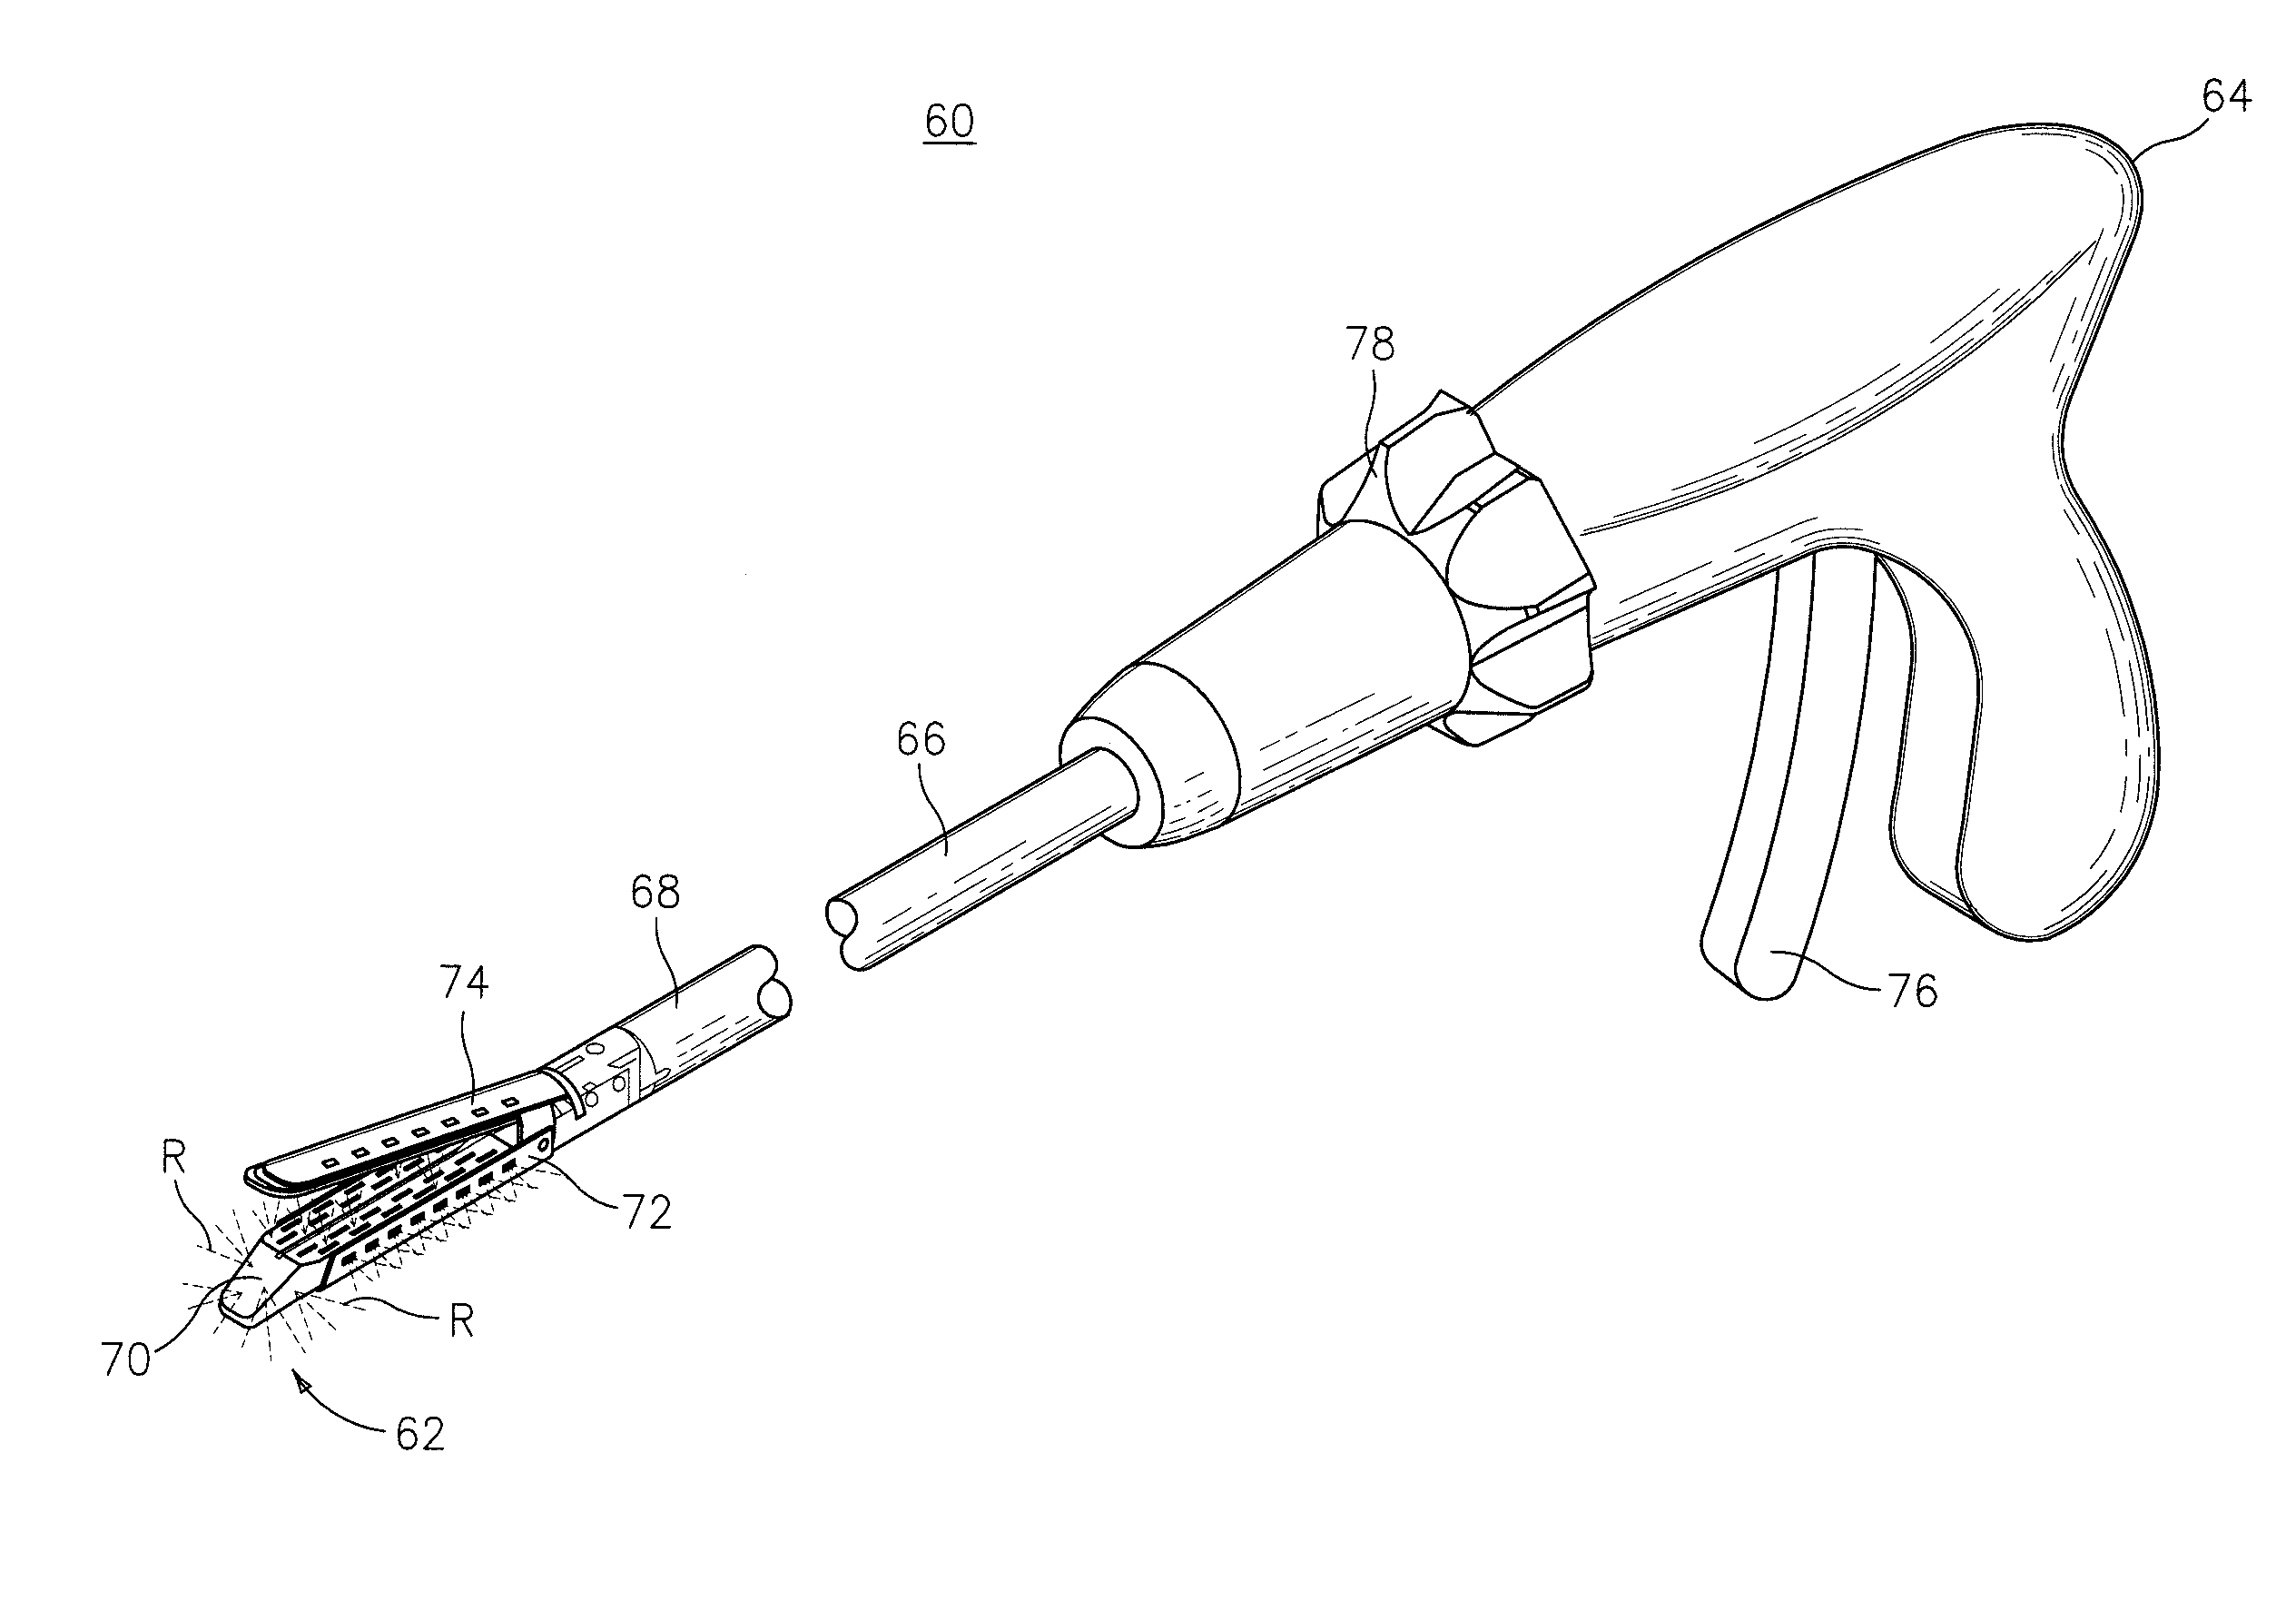 Coated surgical staples and an illuminated staple cartridge for a surgical stapling instrument